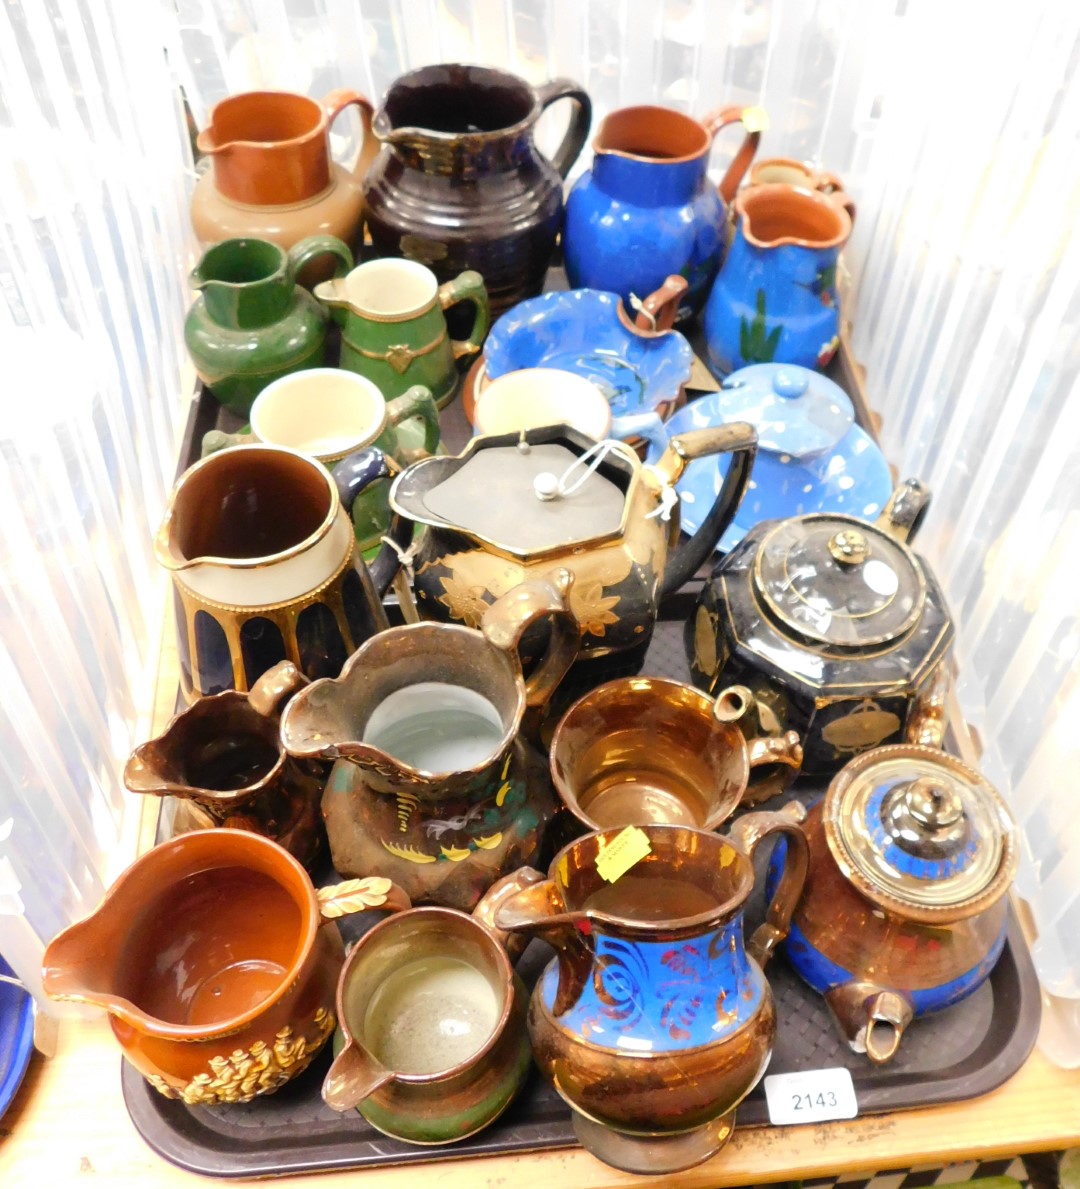 Ceramics in the form of Lustreware jugs, Mottoware jug and various other water jugs decorated in blu